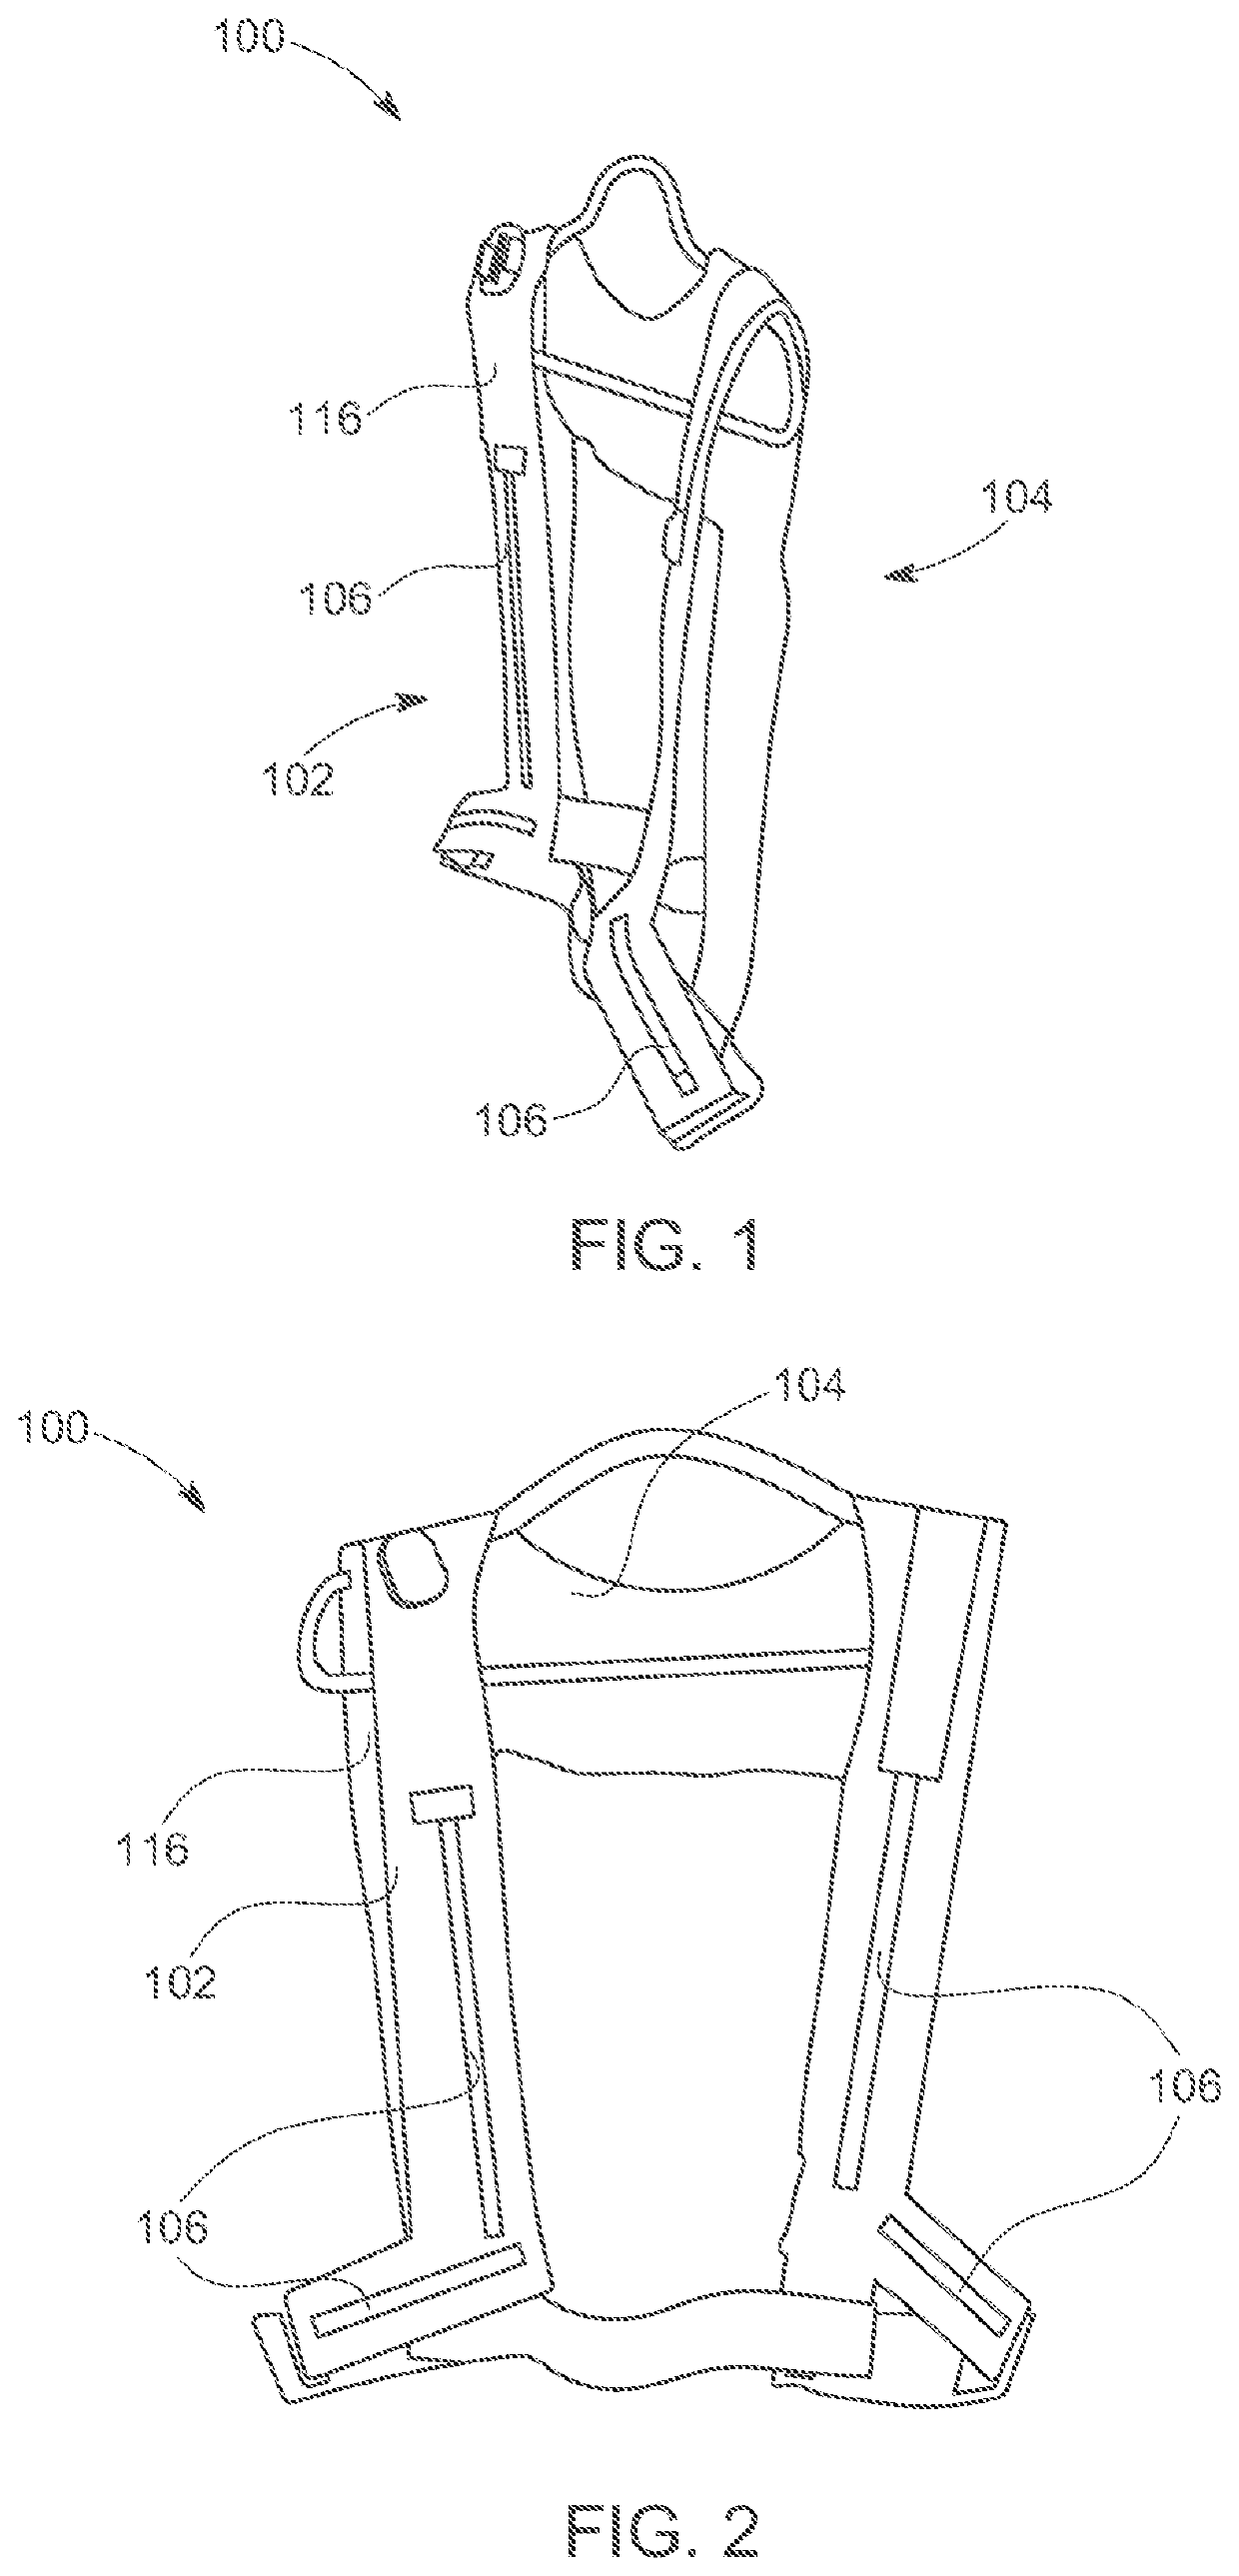 Enhanced visibility human device and multifunctional systems